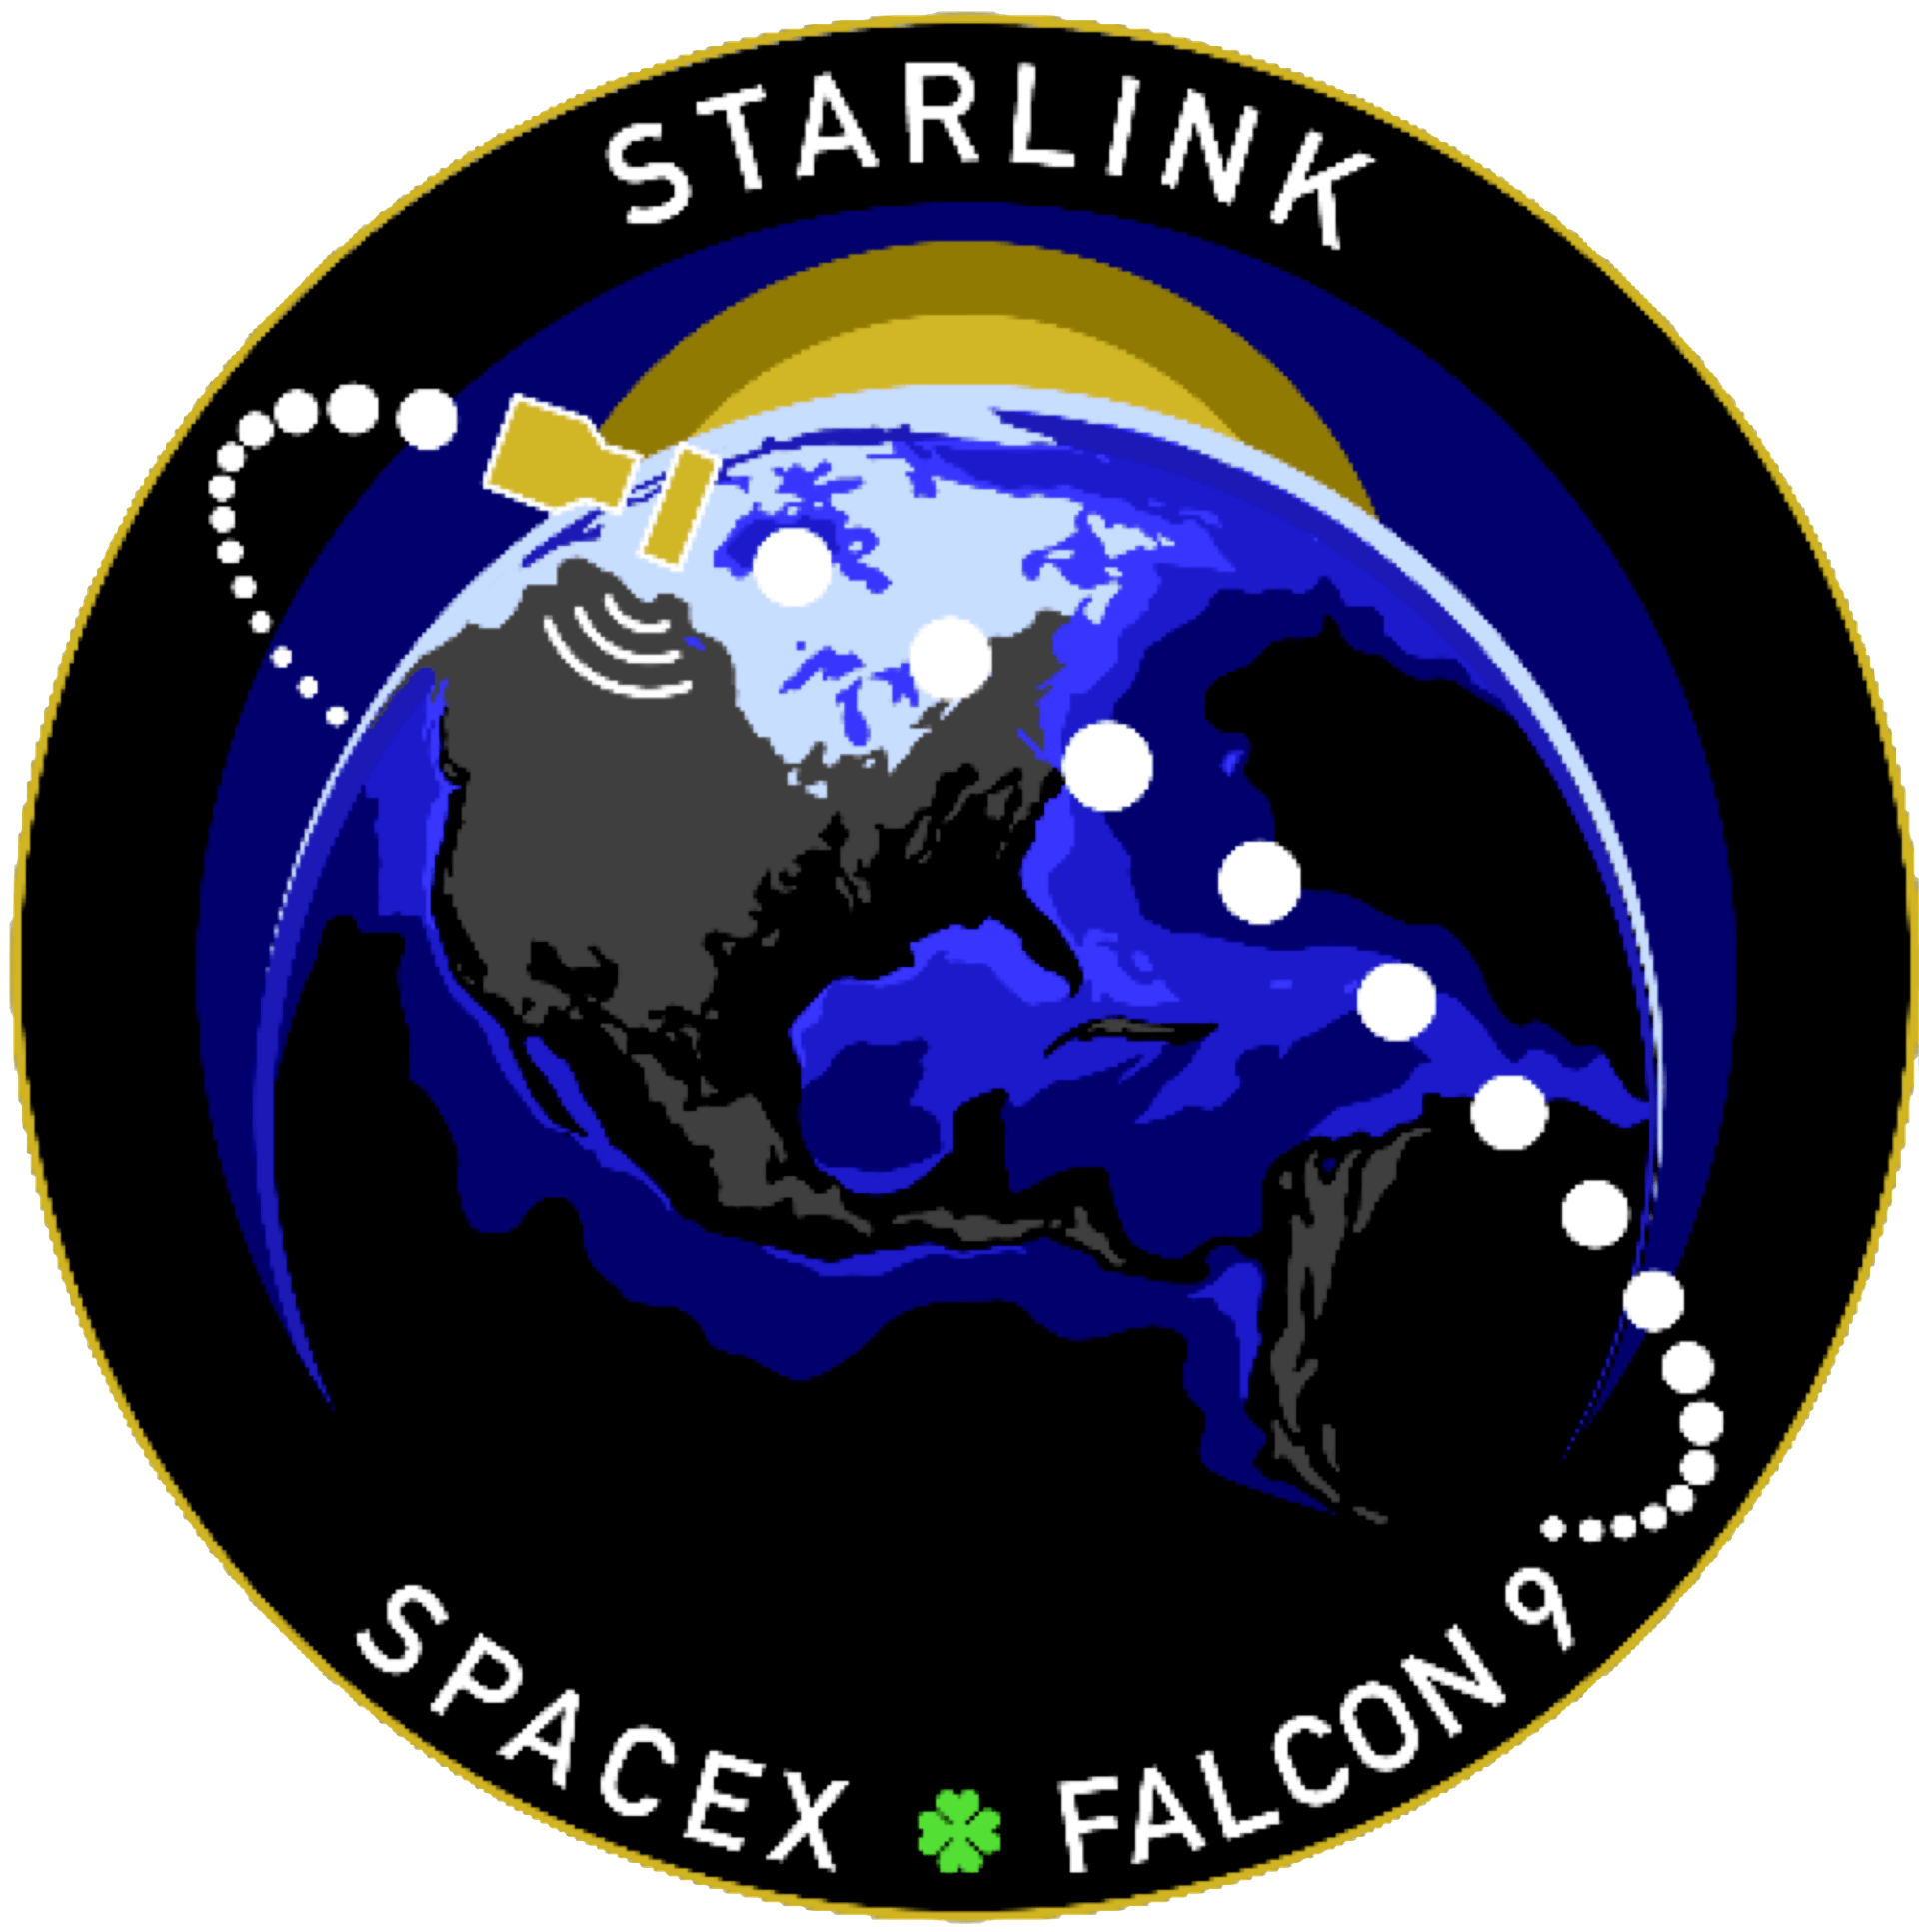 Mission patch for Starlink 23